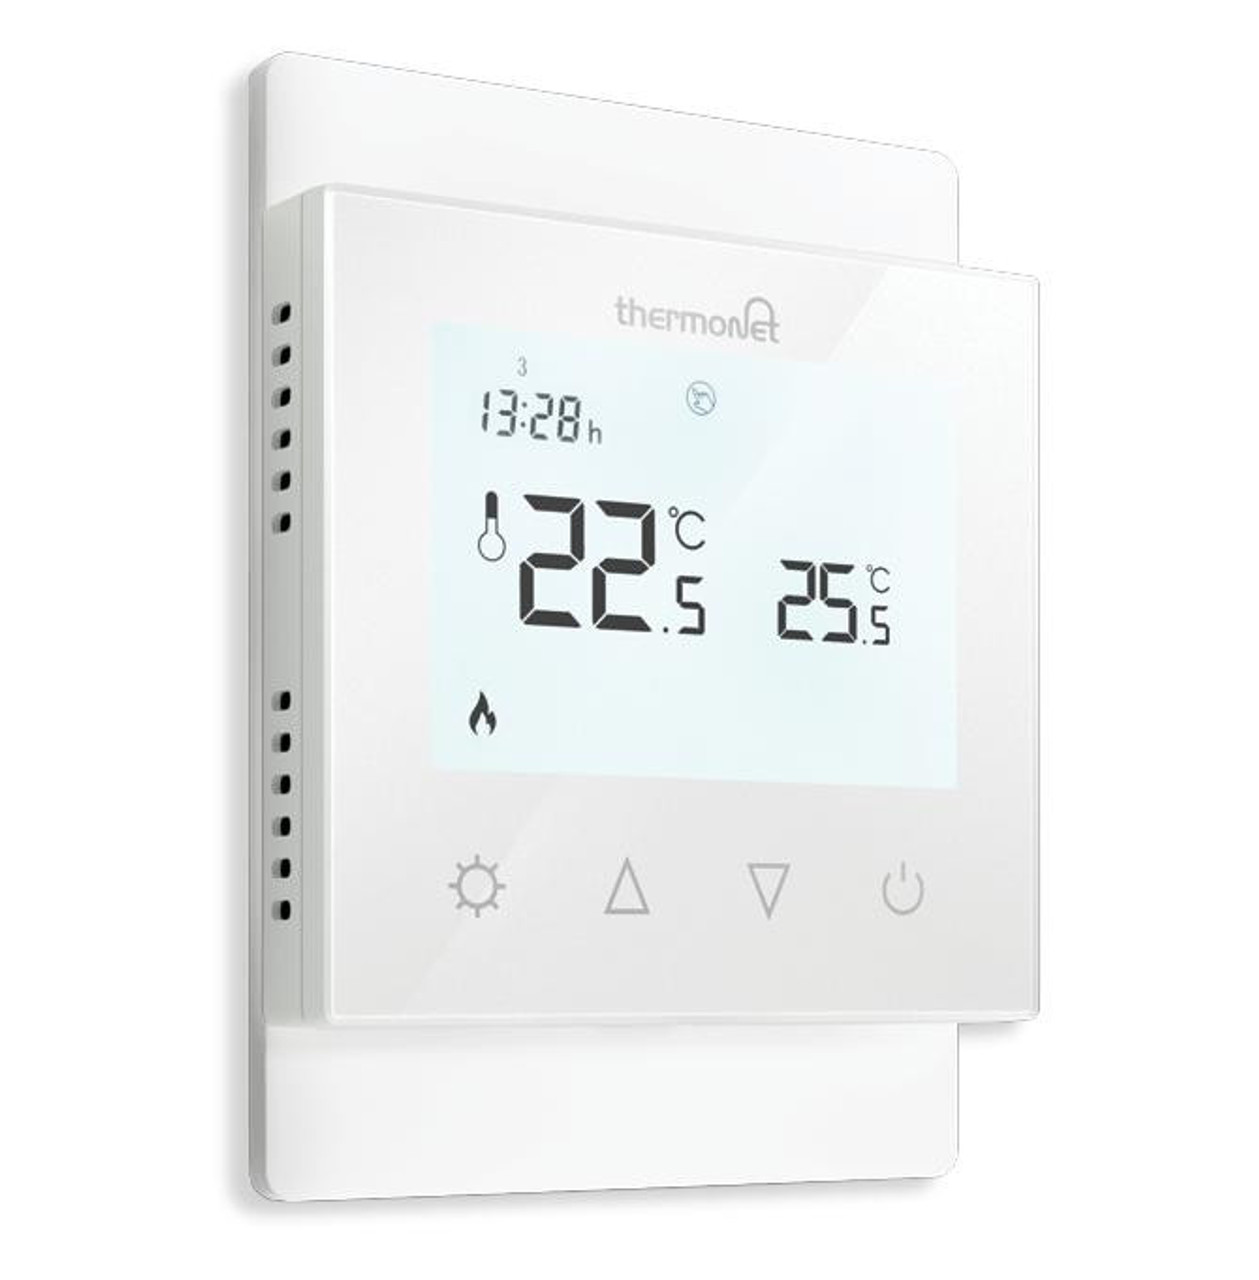 Thermonet EZ 150W/m² Underfloor Heating Kit 115032T with Programmable Thermostat 5220A 16m²